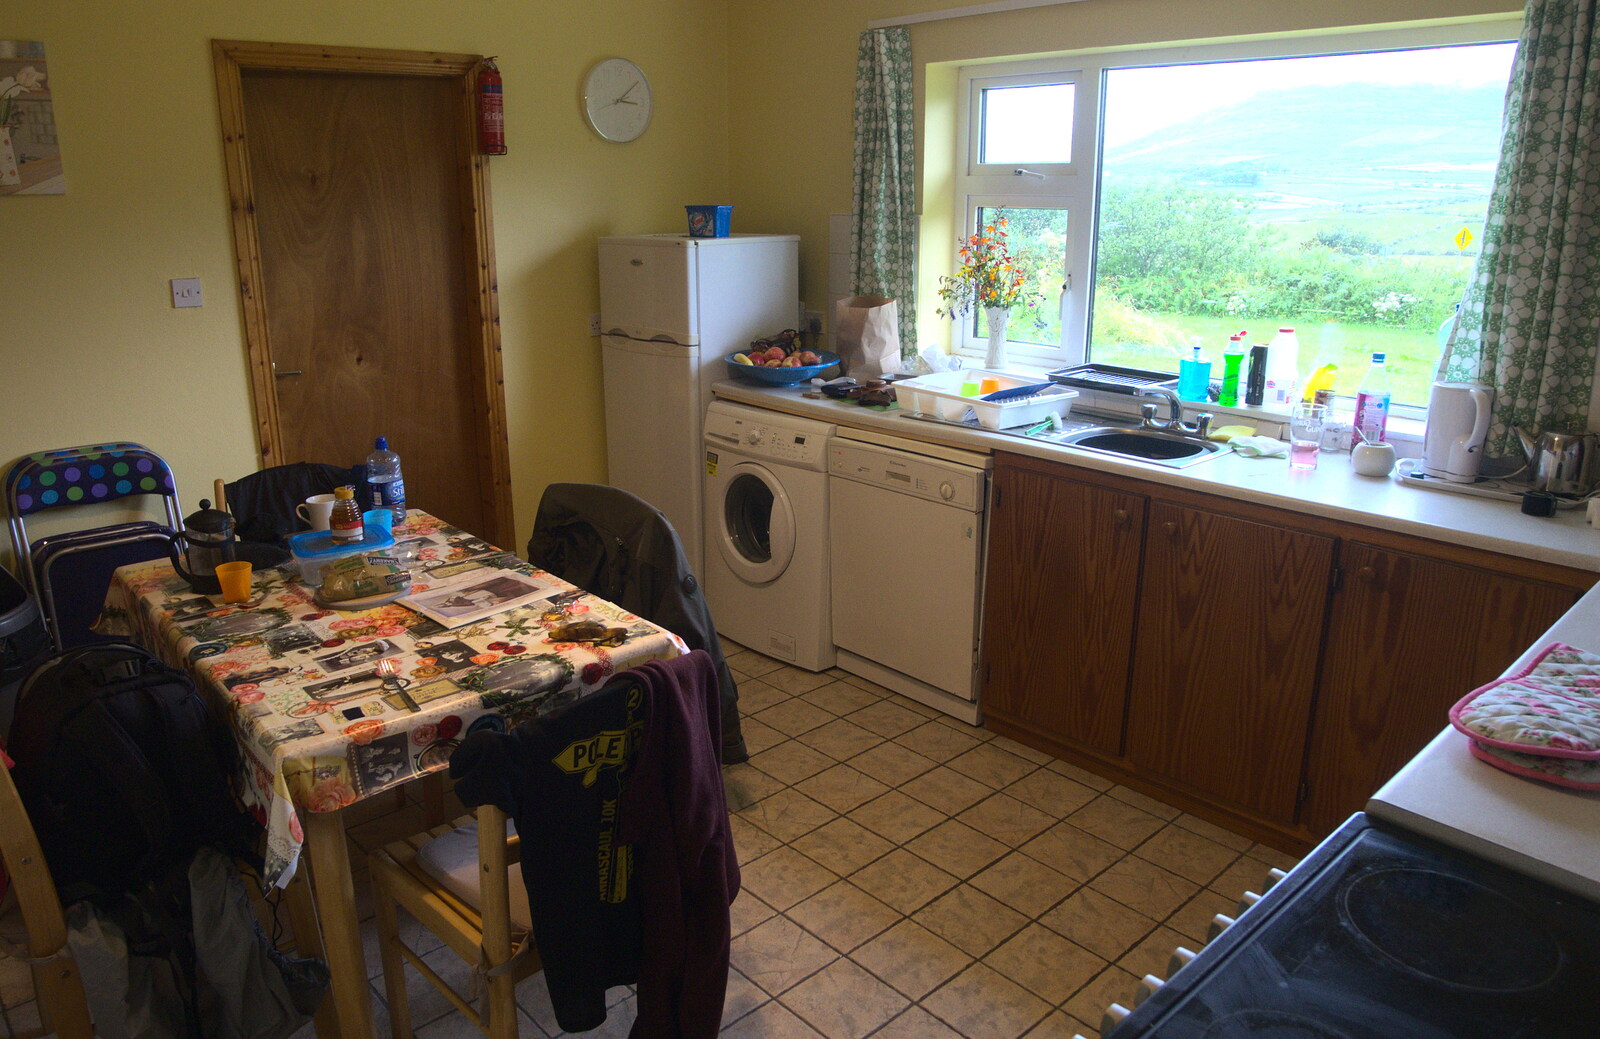 A holiday kitchen, and its amazing views from Minard Beach and Ceol Agus Craic, Lios Póil, Kerry - 6th August 2017